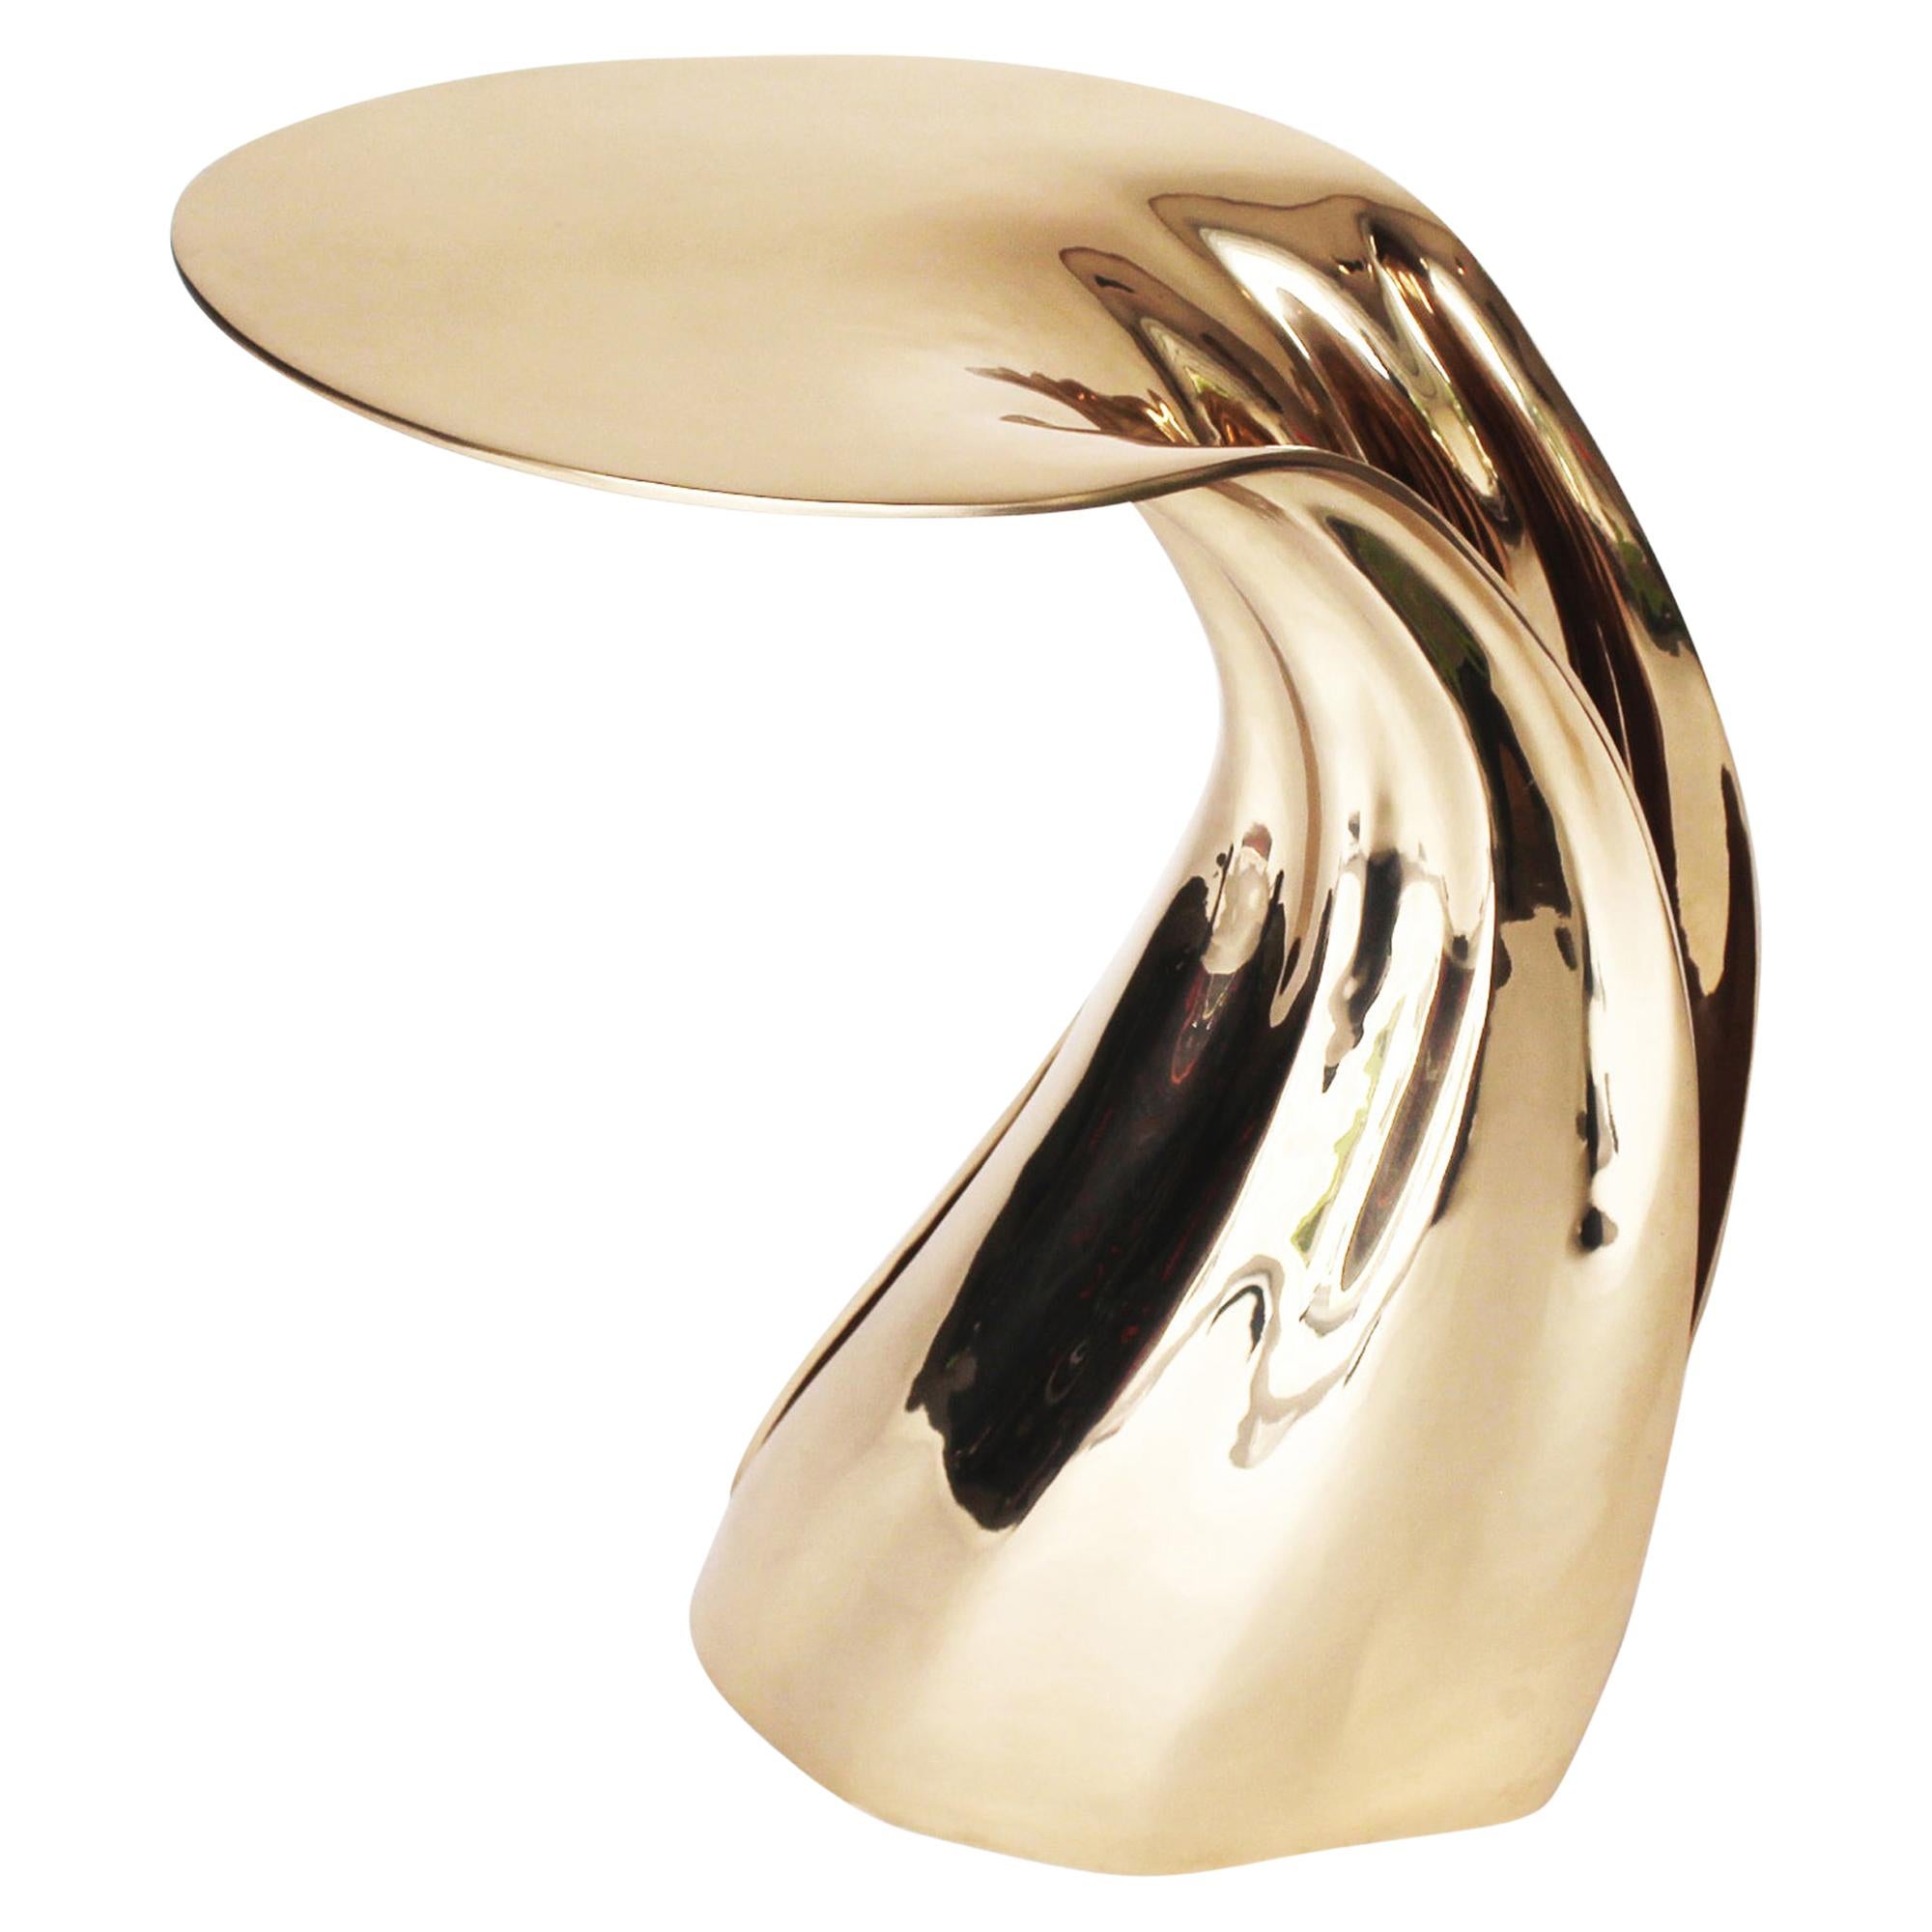 Inflection Table - Polished Bronze Design by Michael Sean Stolworthy For Sale